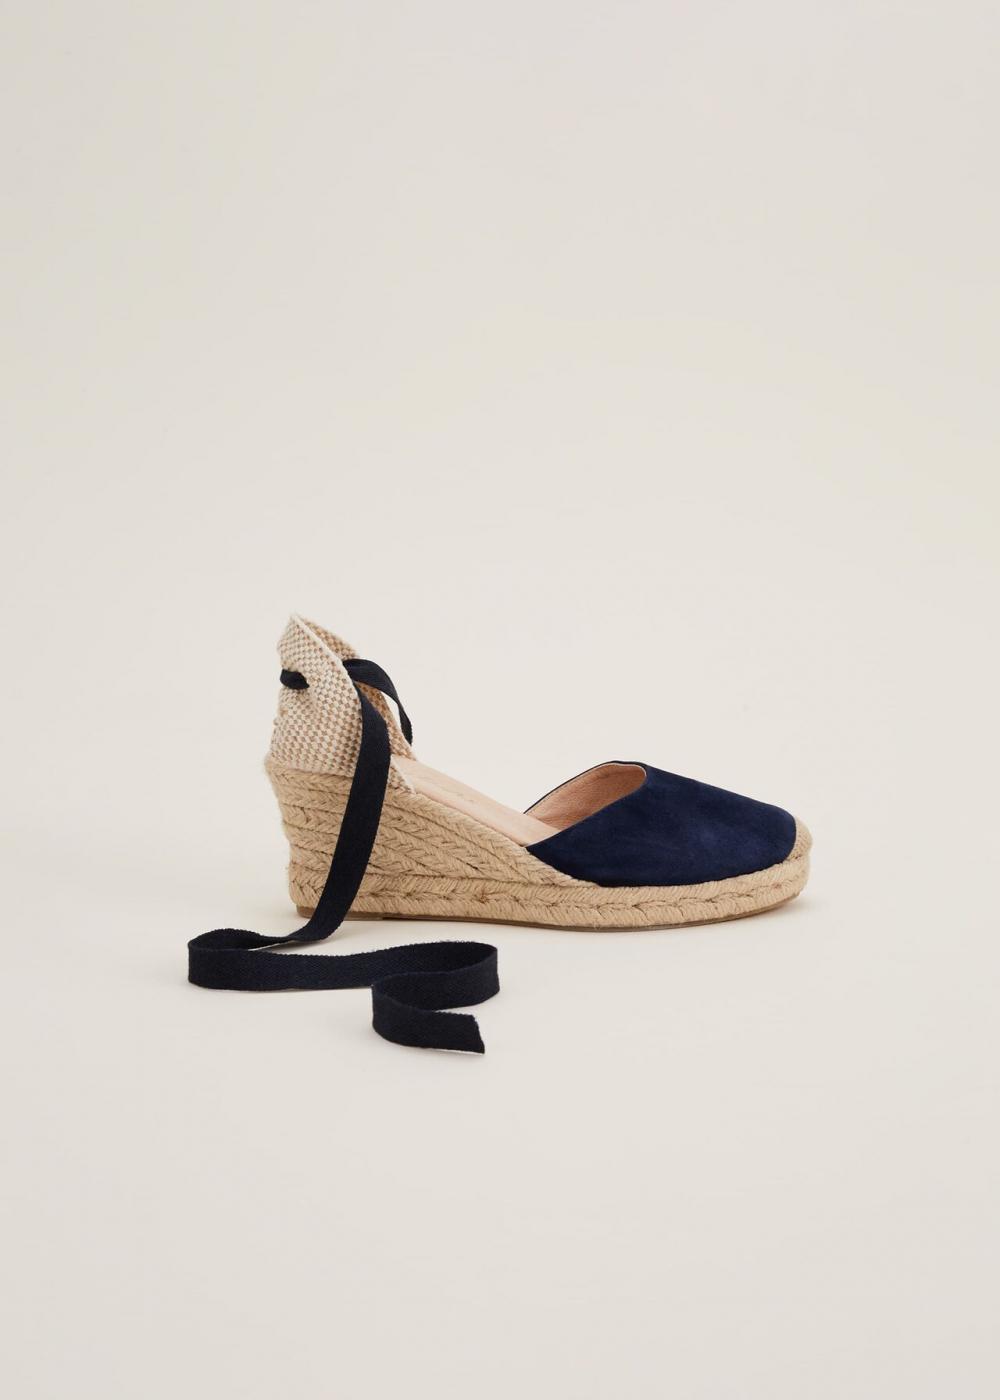 Veronica Ankle Tie Espadrilles Navy | Phase Eight Womens Sandals & Wedges